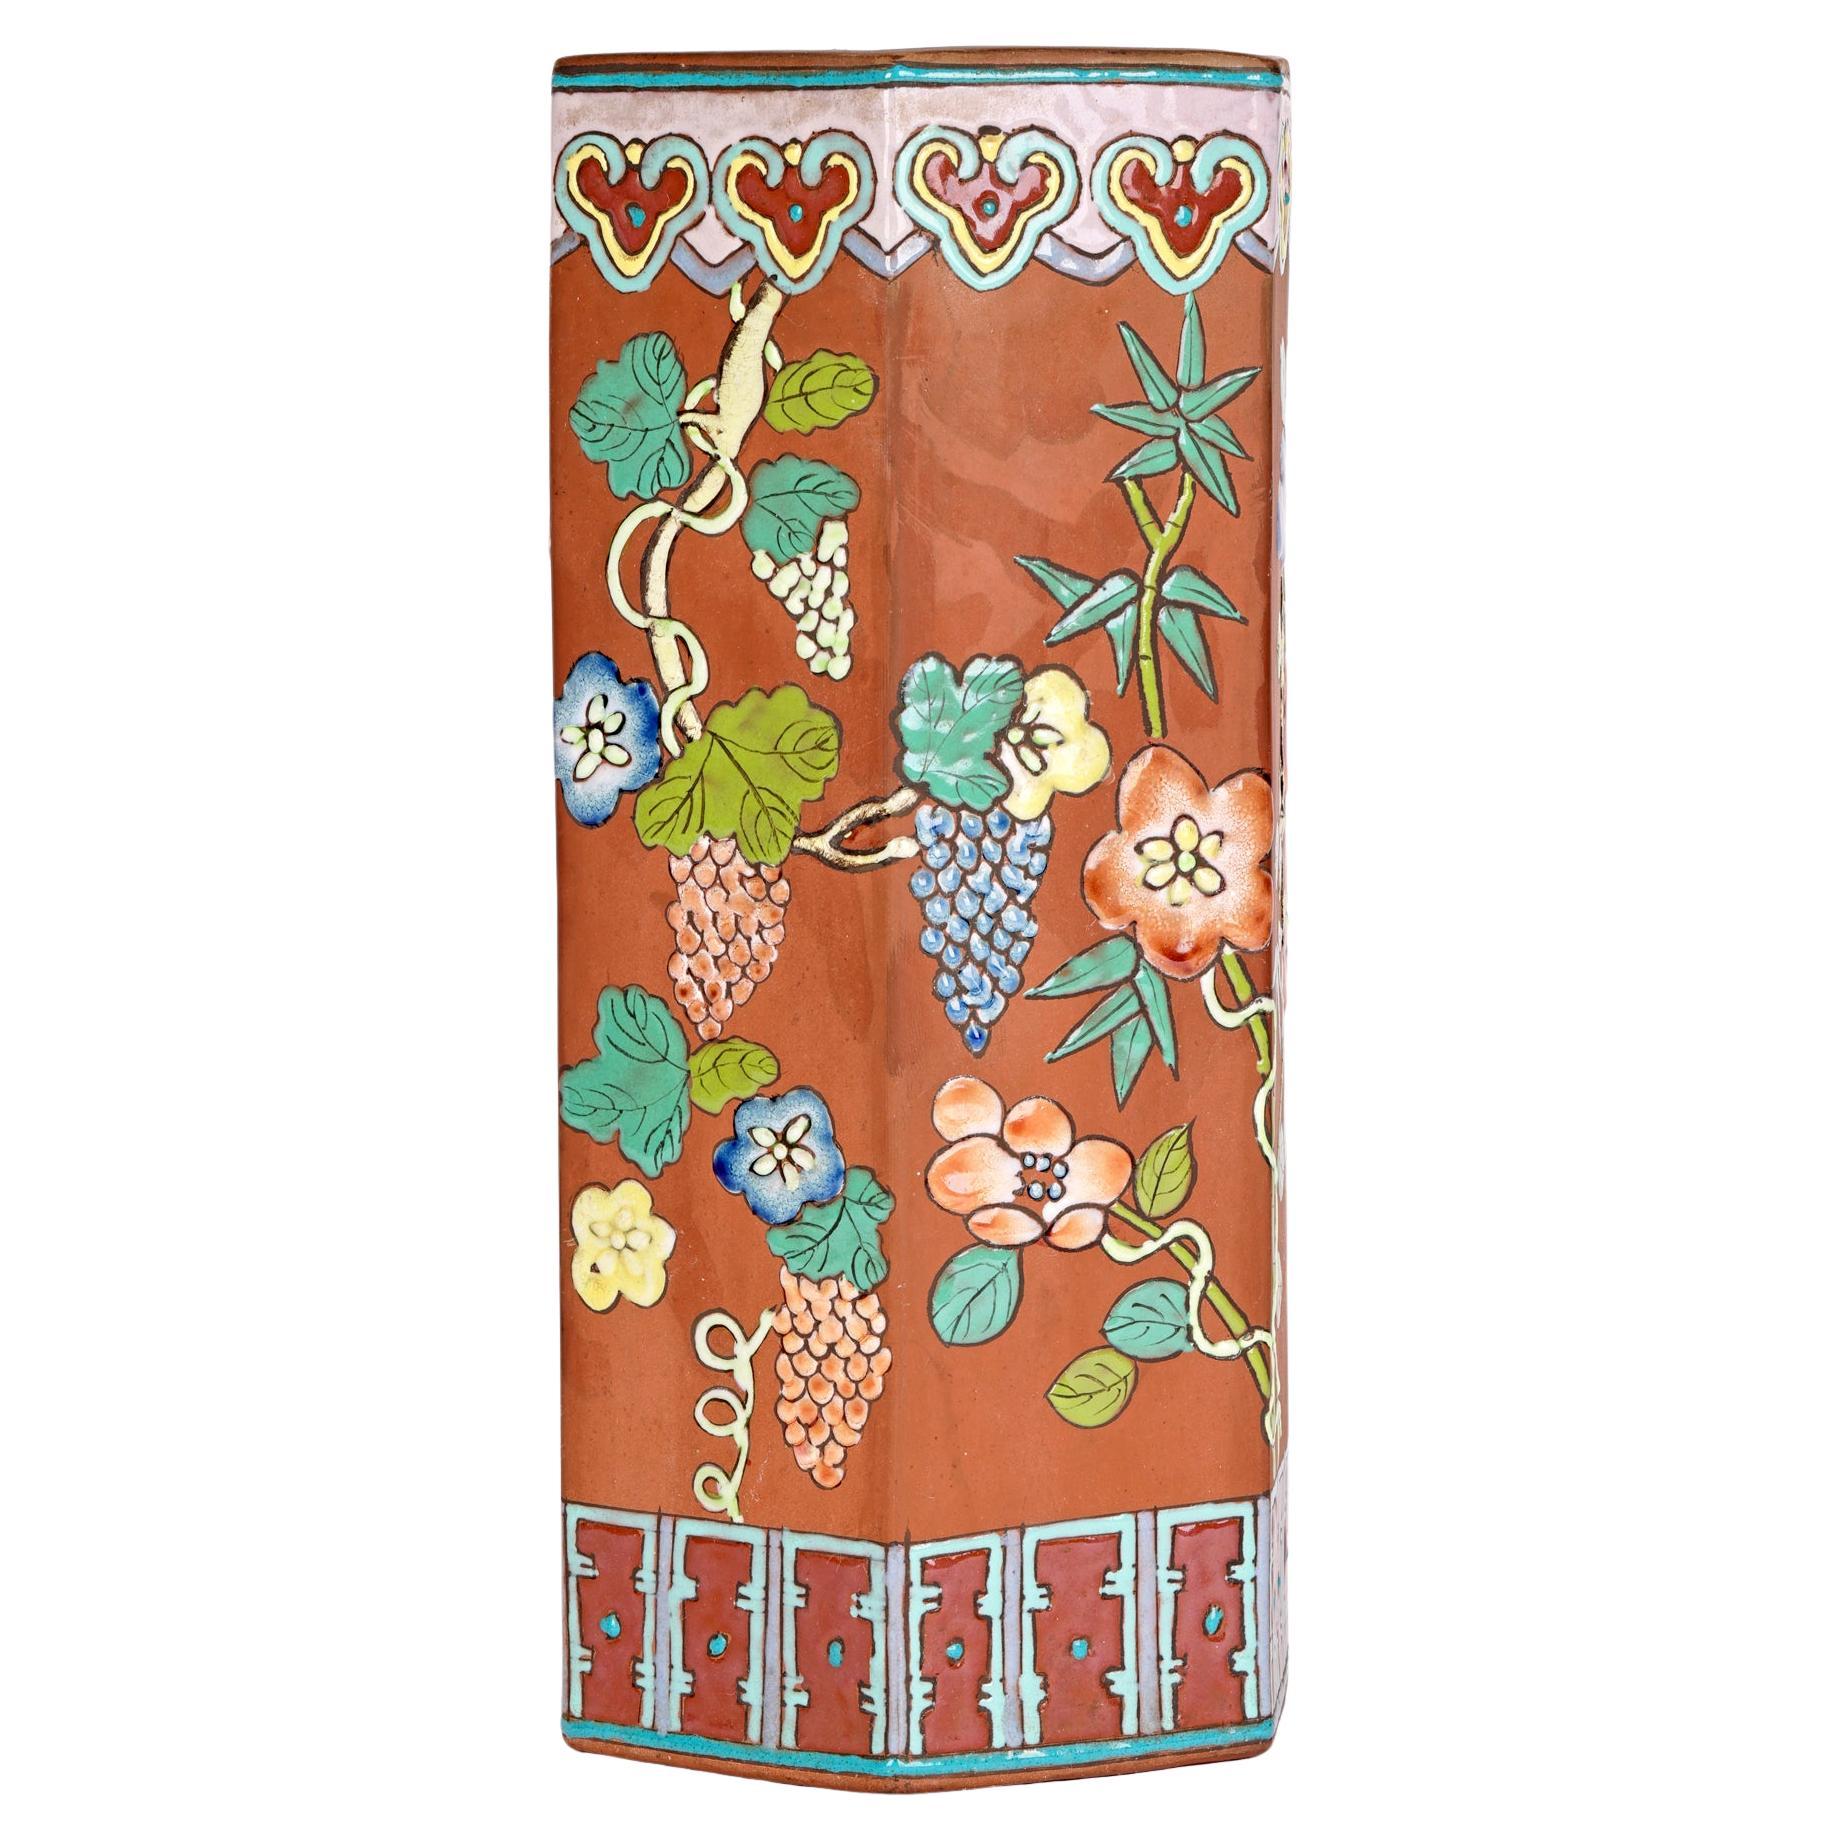 Chinese Yixing Hexagonal Vase with Painted Floral & Vine Designs